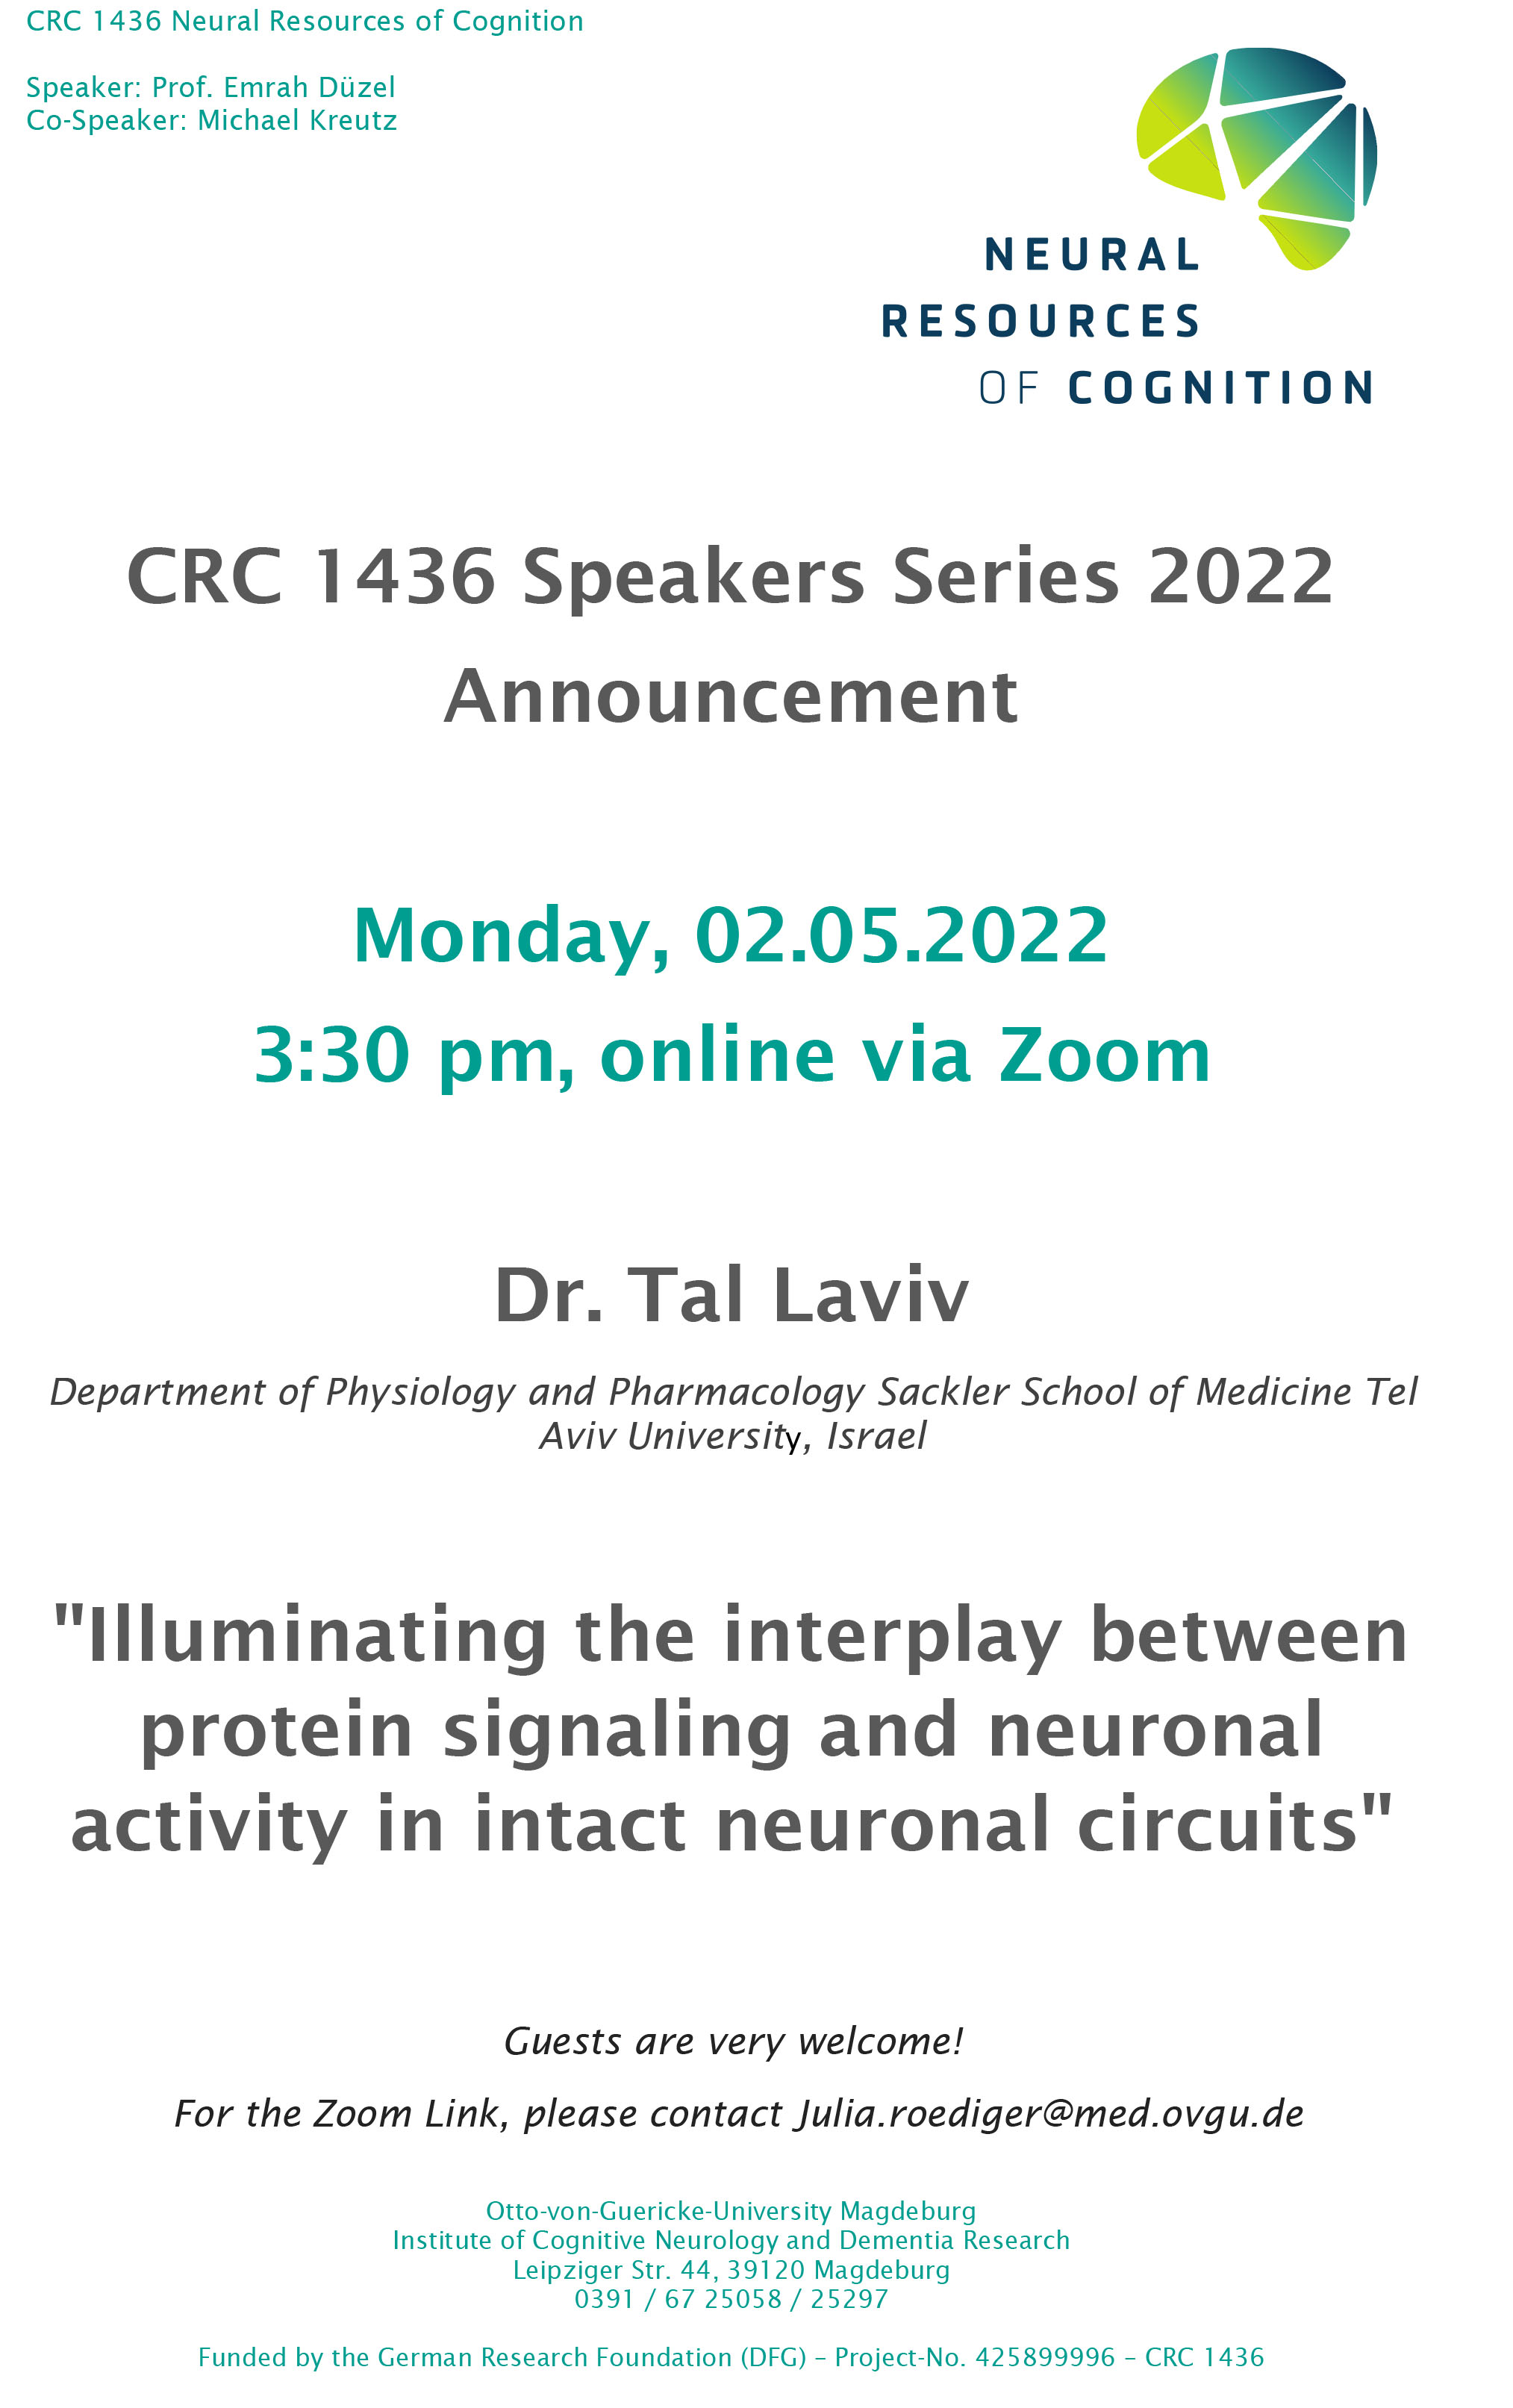 CRC 1436 Speakers Series: Illuminating the interplay between protein signaling and neuronal activity in intact neuronal circuits @ online